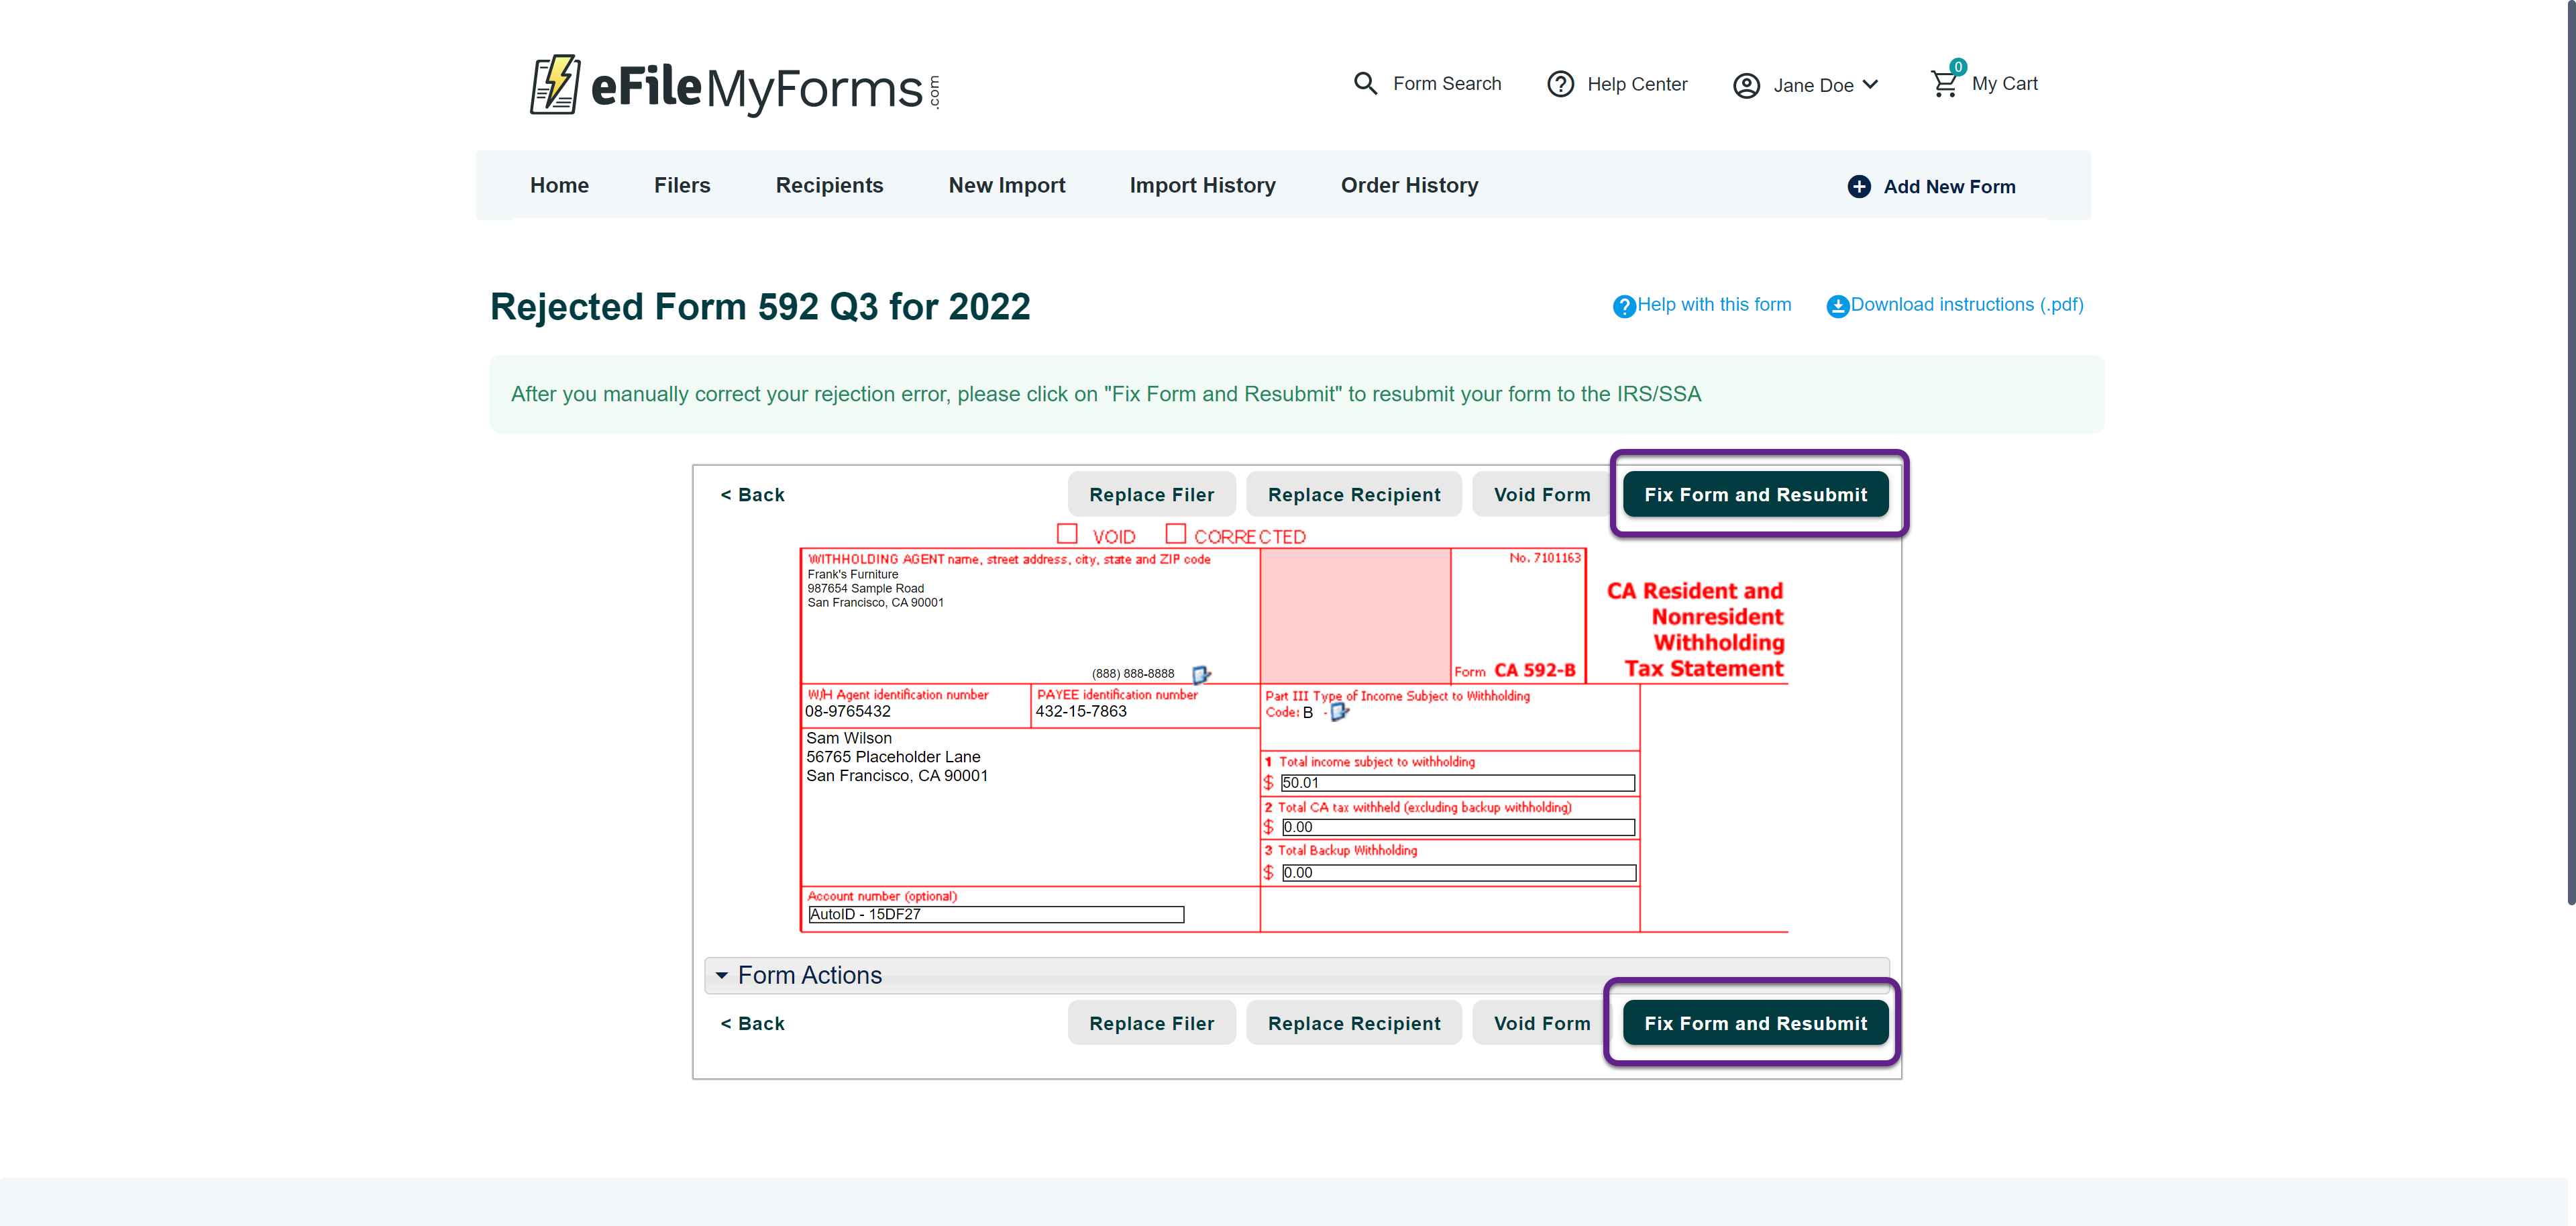 Image of the Rejected Form page with a callout on the Fix Form and Resubmit button.